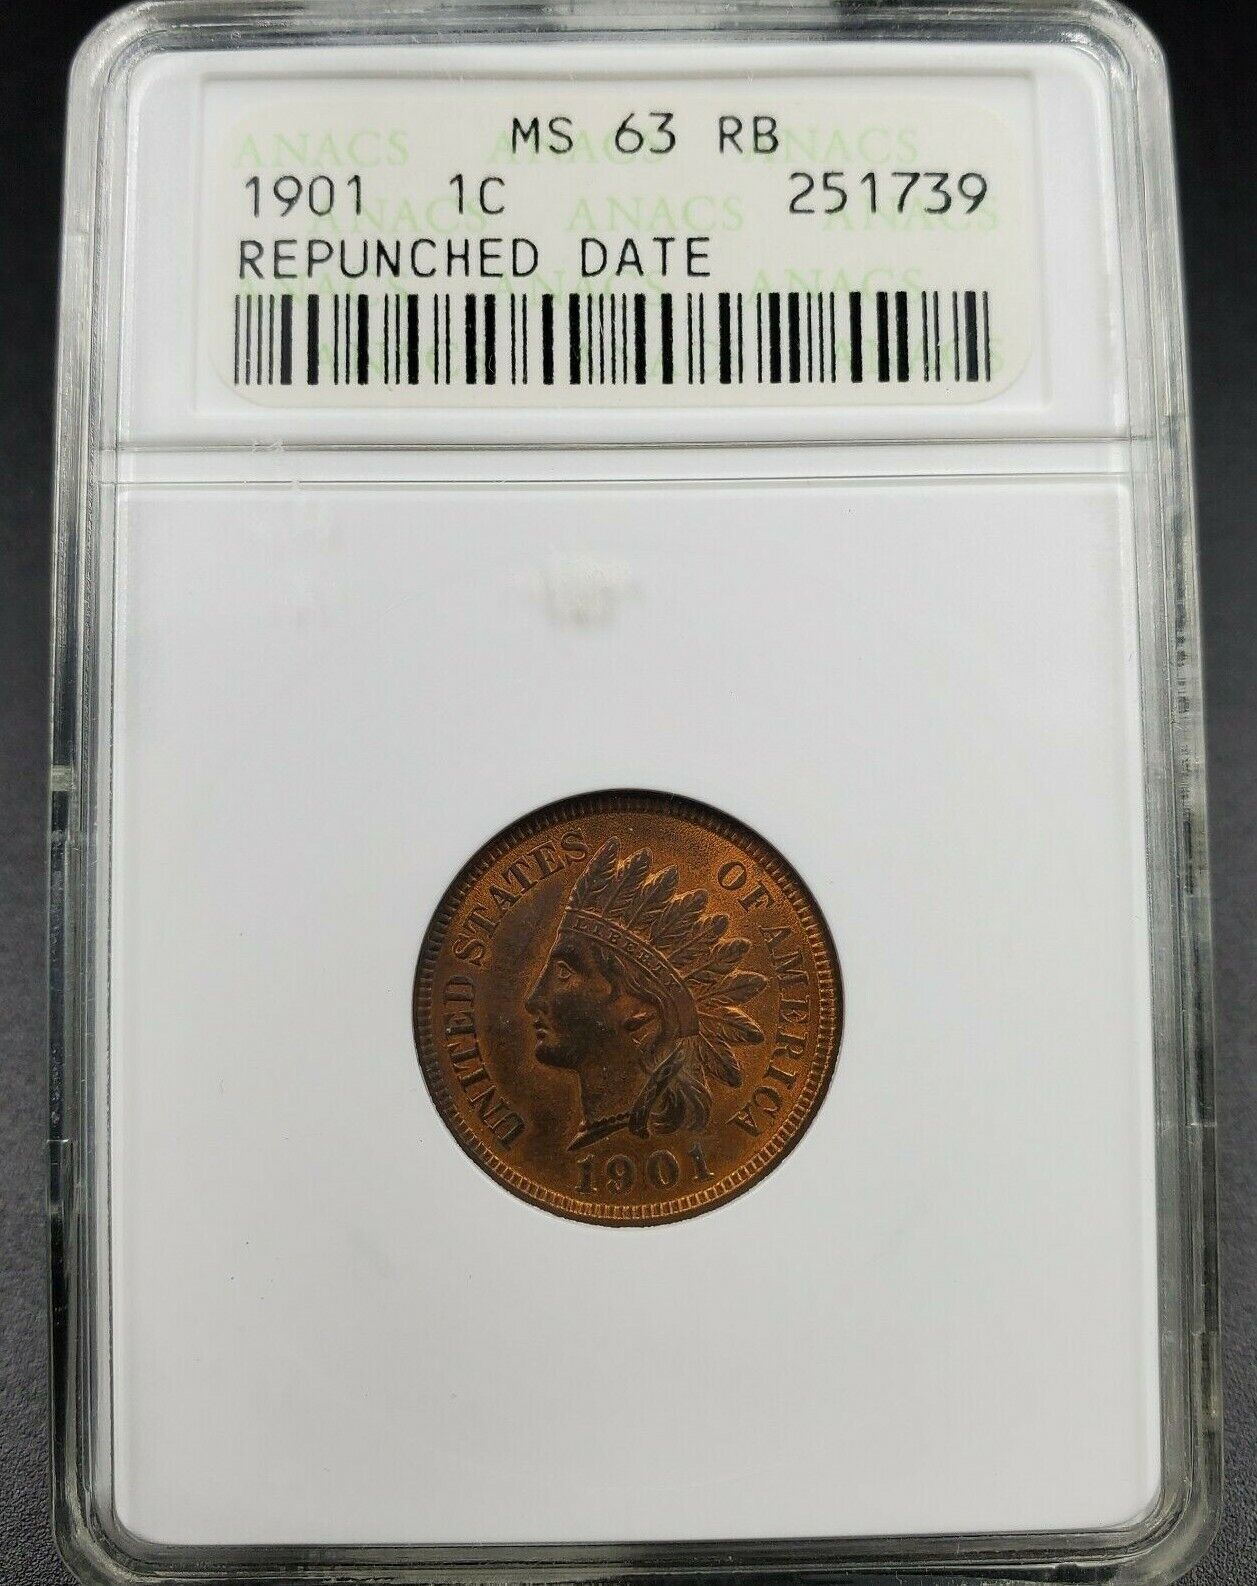 1901 P Indian Cent Penny Error ANACS MS63 RB Red Brown RPD Repunched Date 19/1